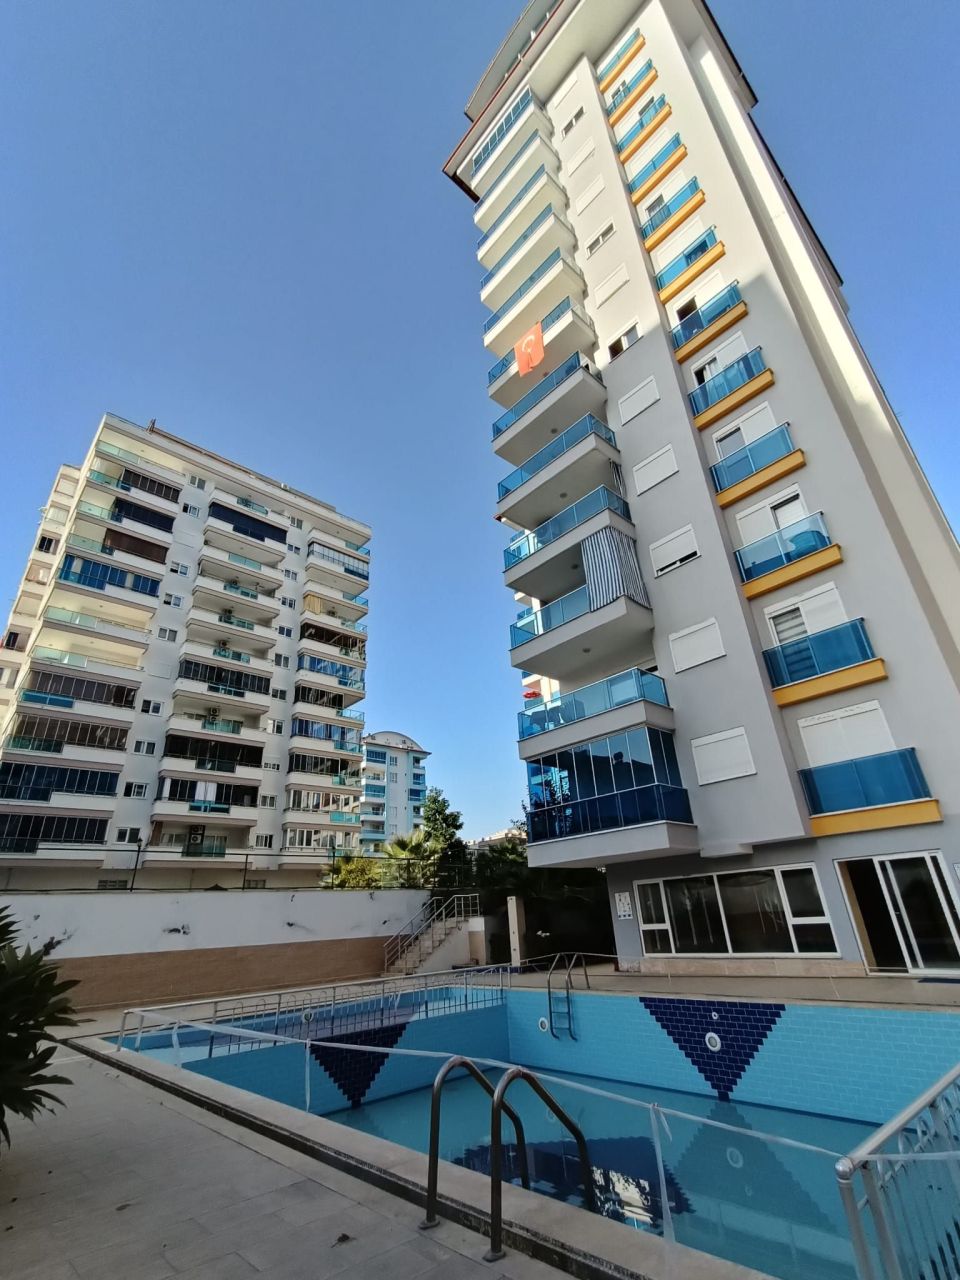 Flat in Alanya, Turkey, 100 m² - picture 1